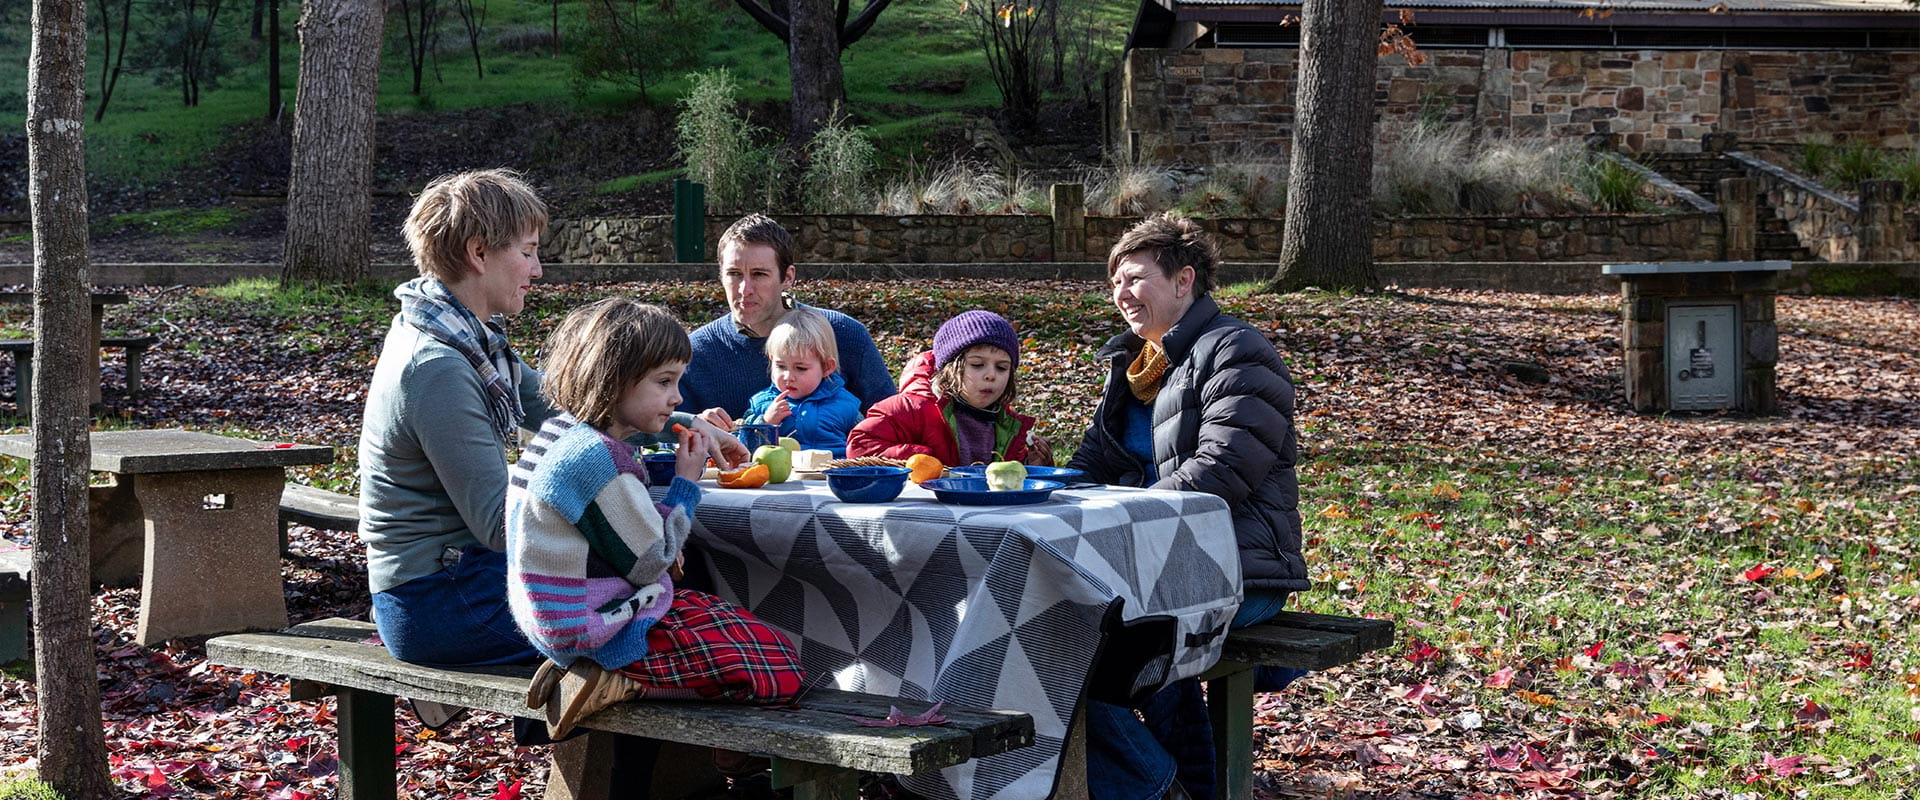 Three adults and three children sit on a picnic table in a leafy picnic area enjoying some fruit and biscuits